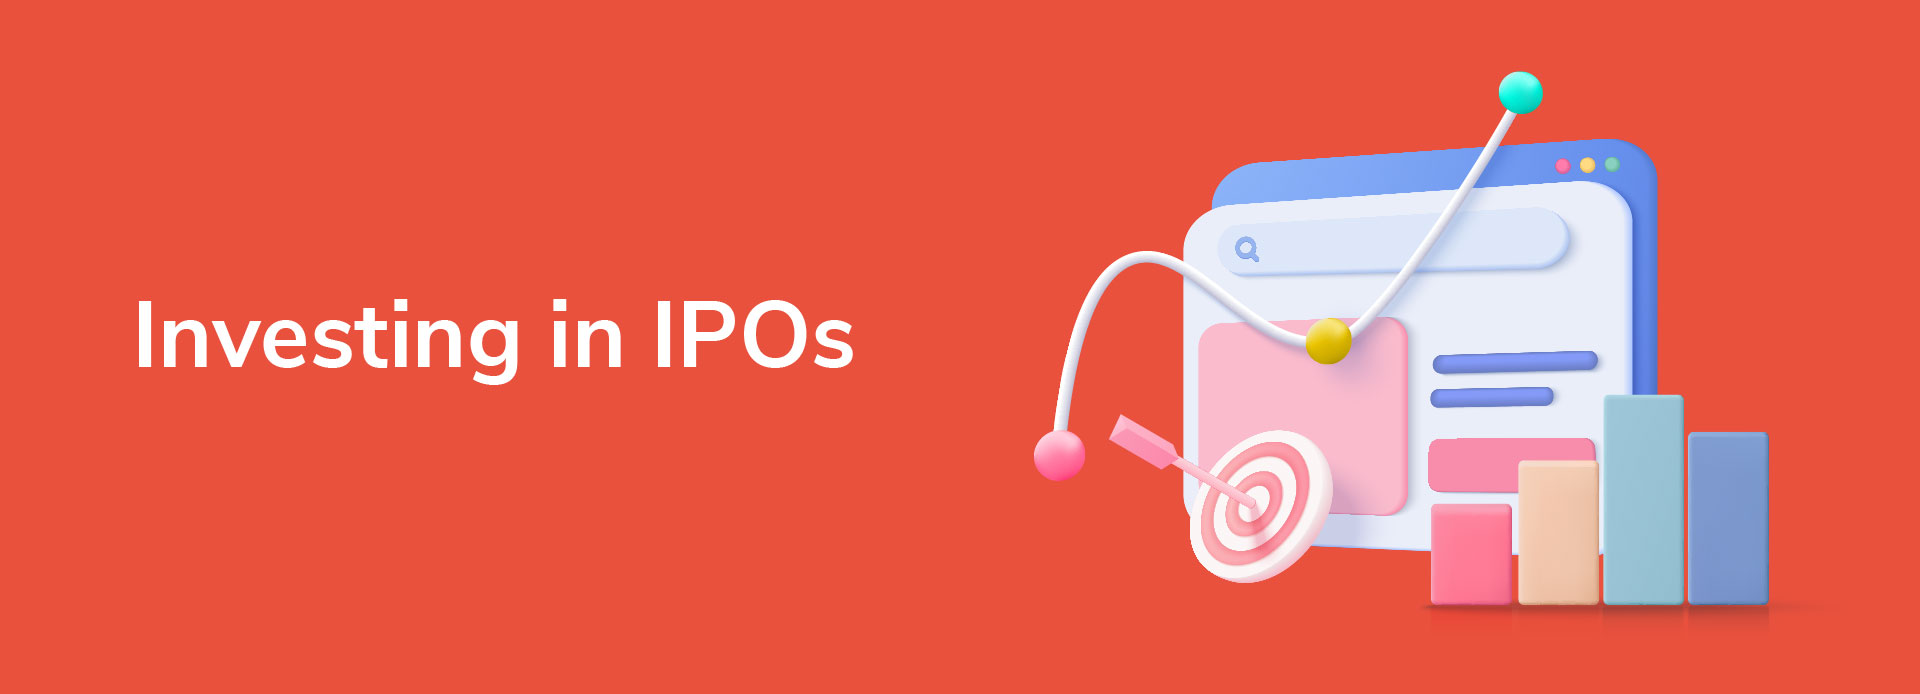 Investing in IPOs: Risks, Rewards and Considerations 